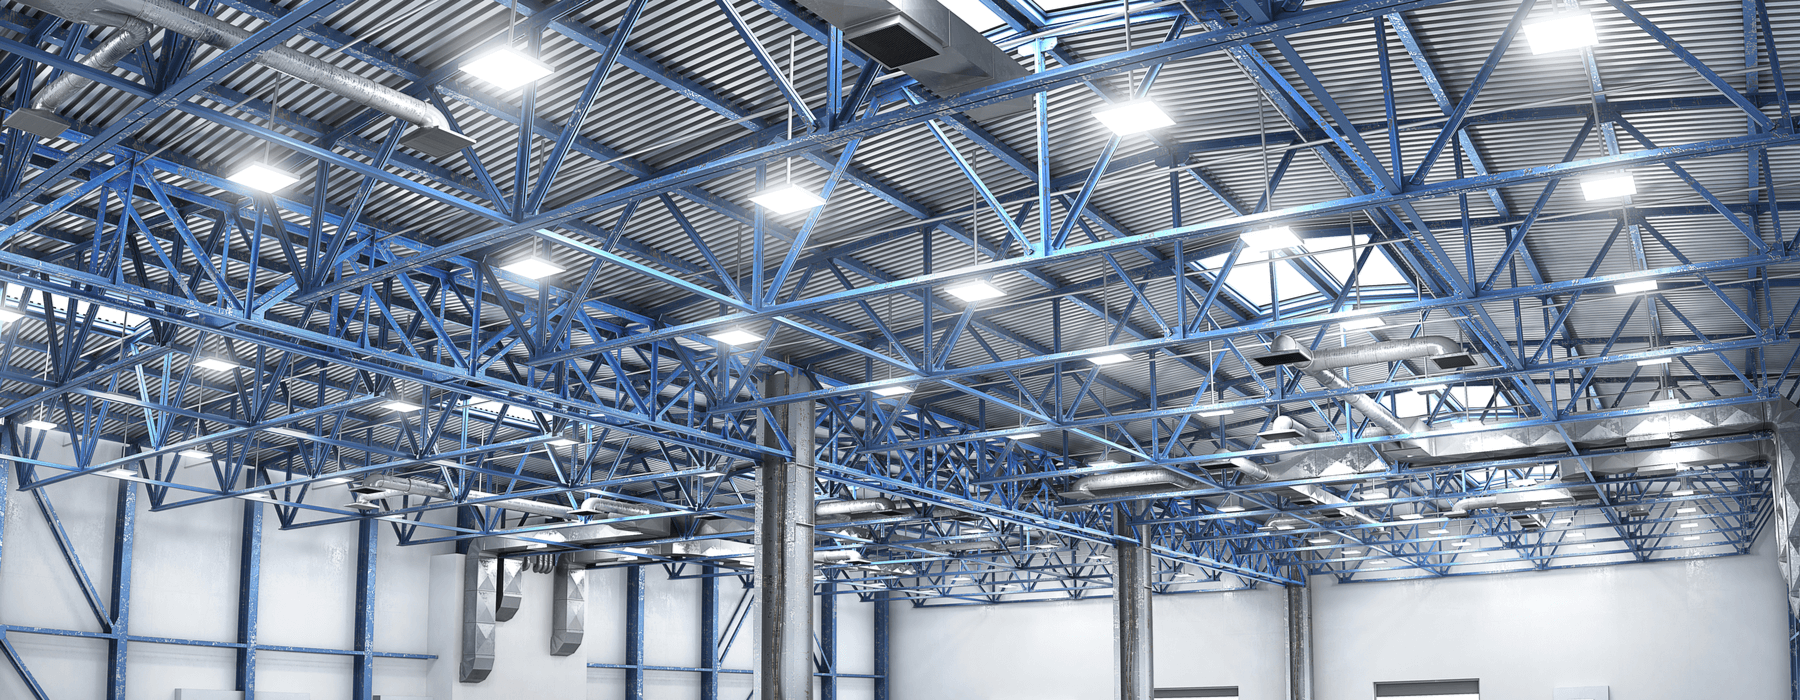 LED Lighting Tips for Warehouses and Fulfillment Centers